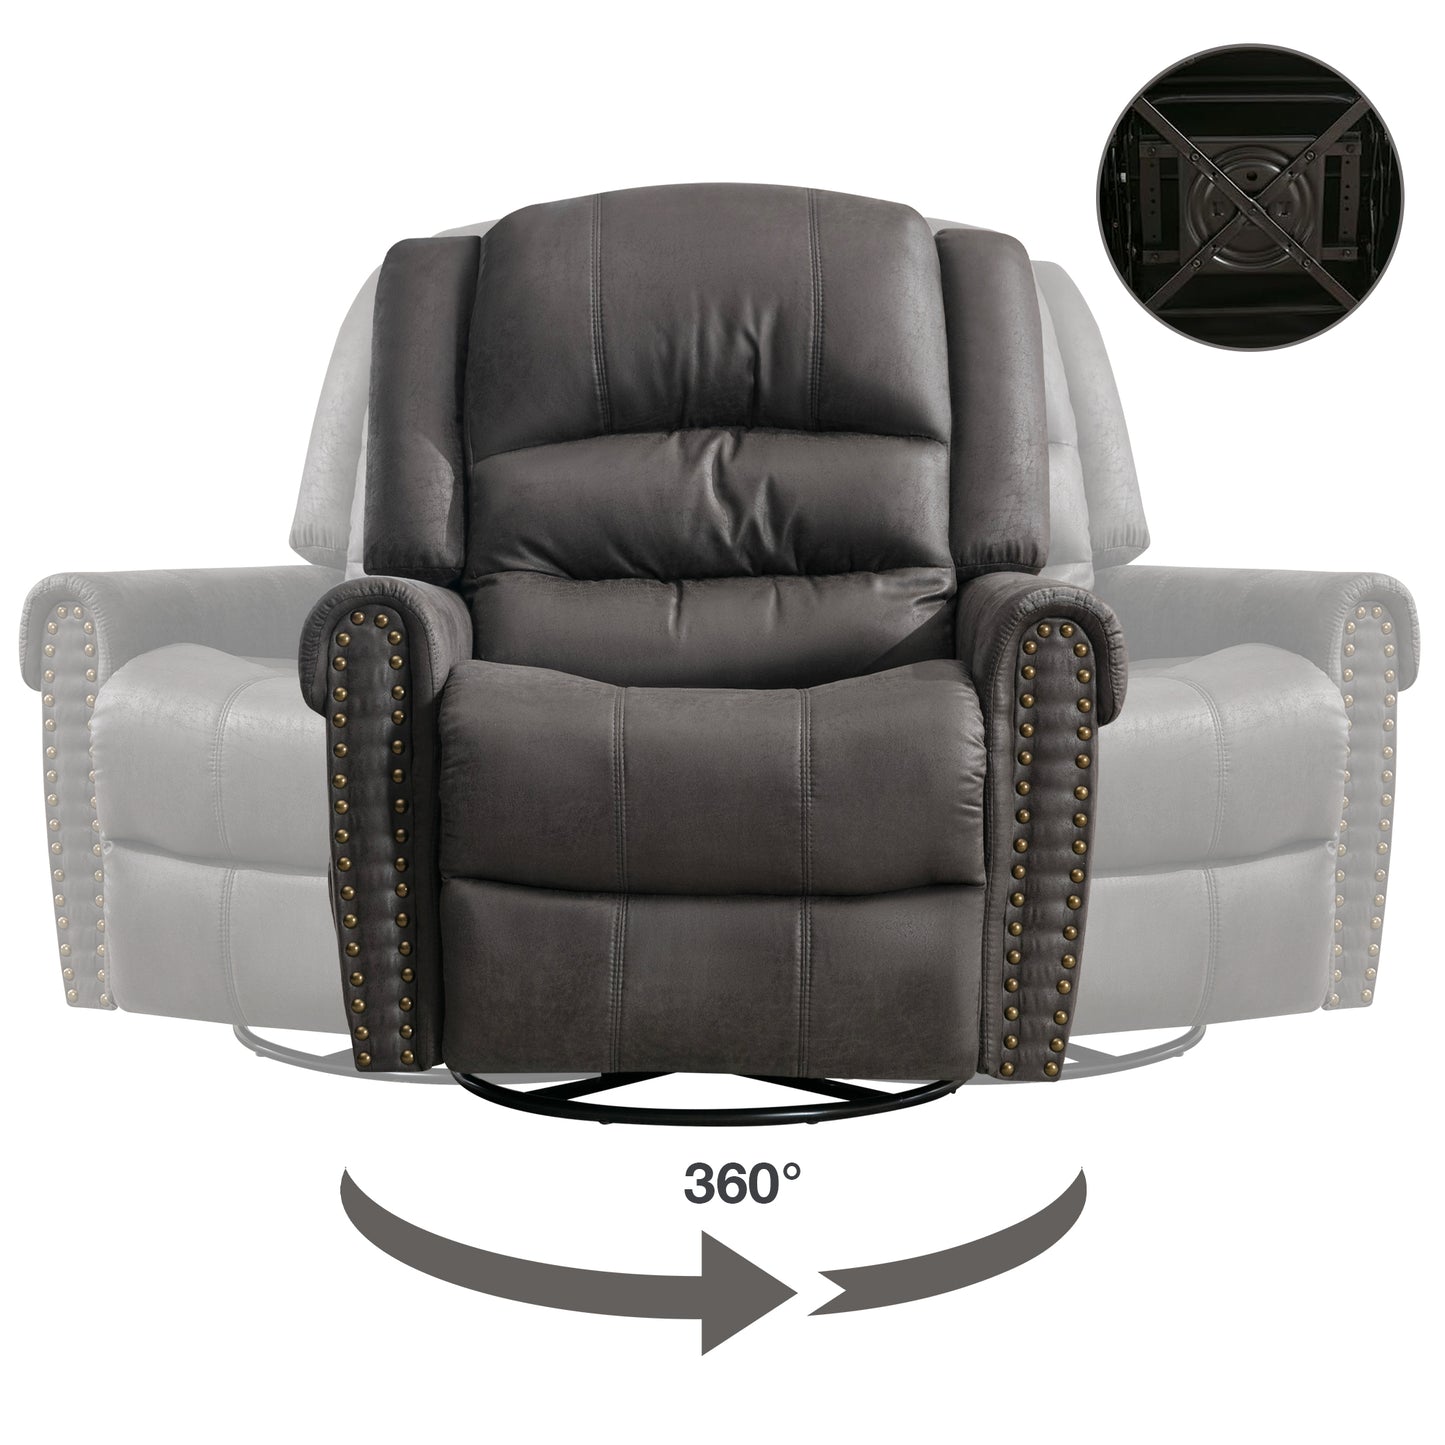 SYNGAR Swivel Rocker Recliner Chair for Living Room, Manual Reclining Chair Oversized with Heat and Massage Function, USB, Soft Fabric Rocking Sofa Glider Chair for Bedroom Home Theater, Gray